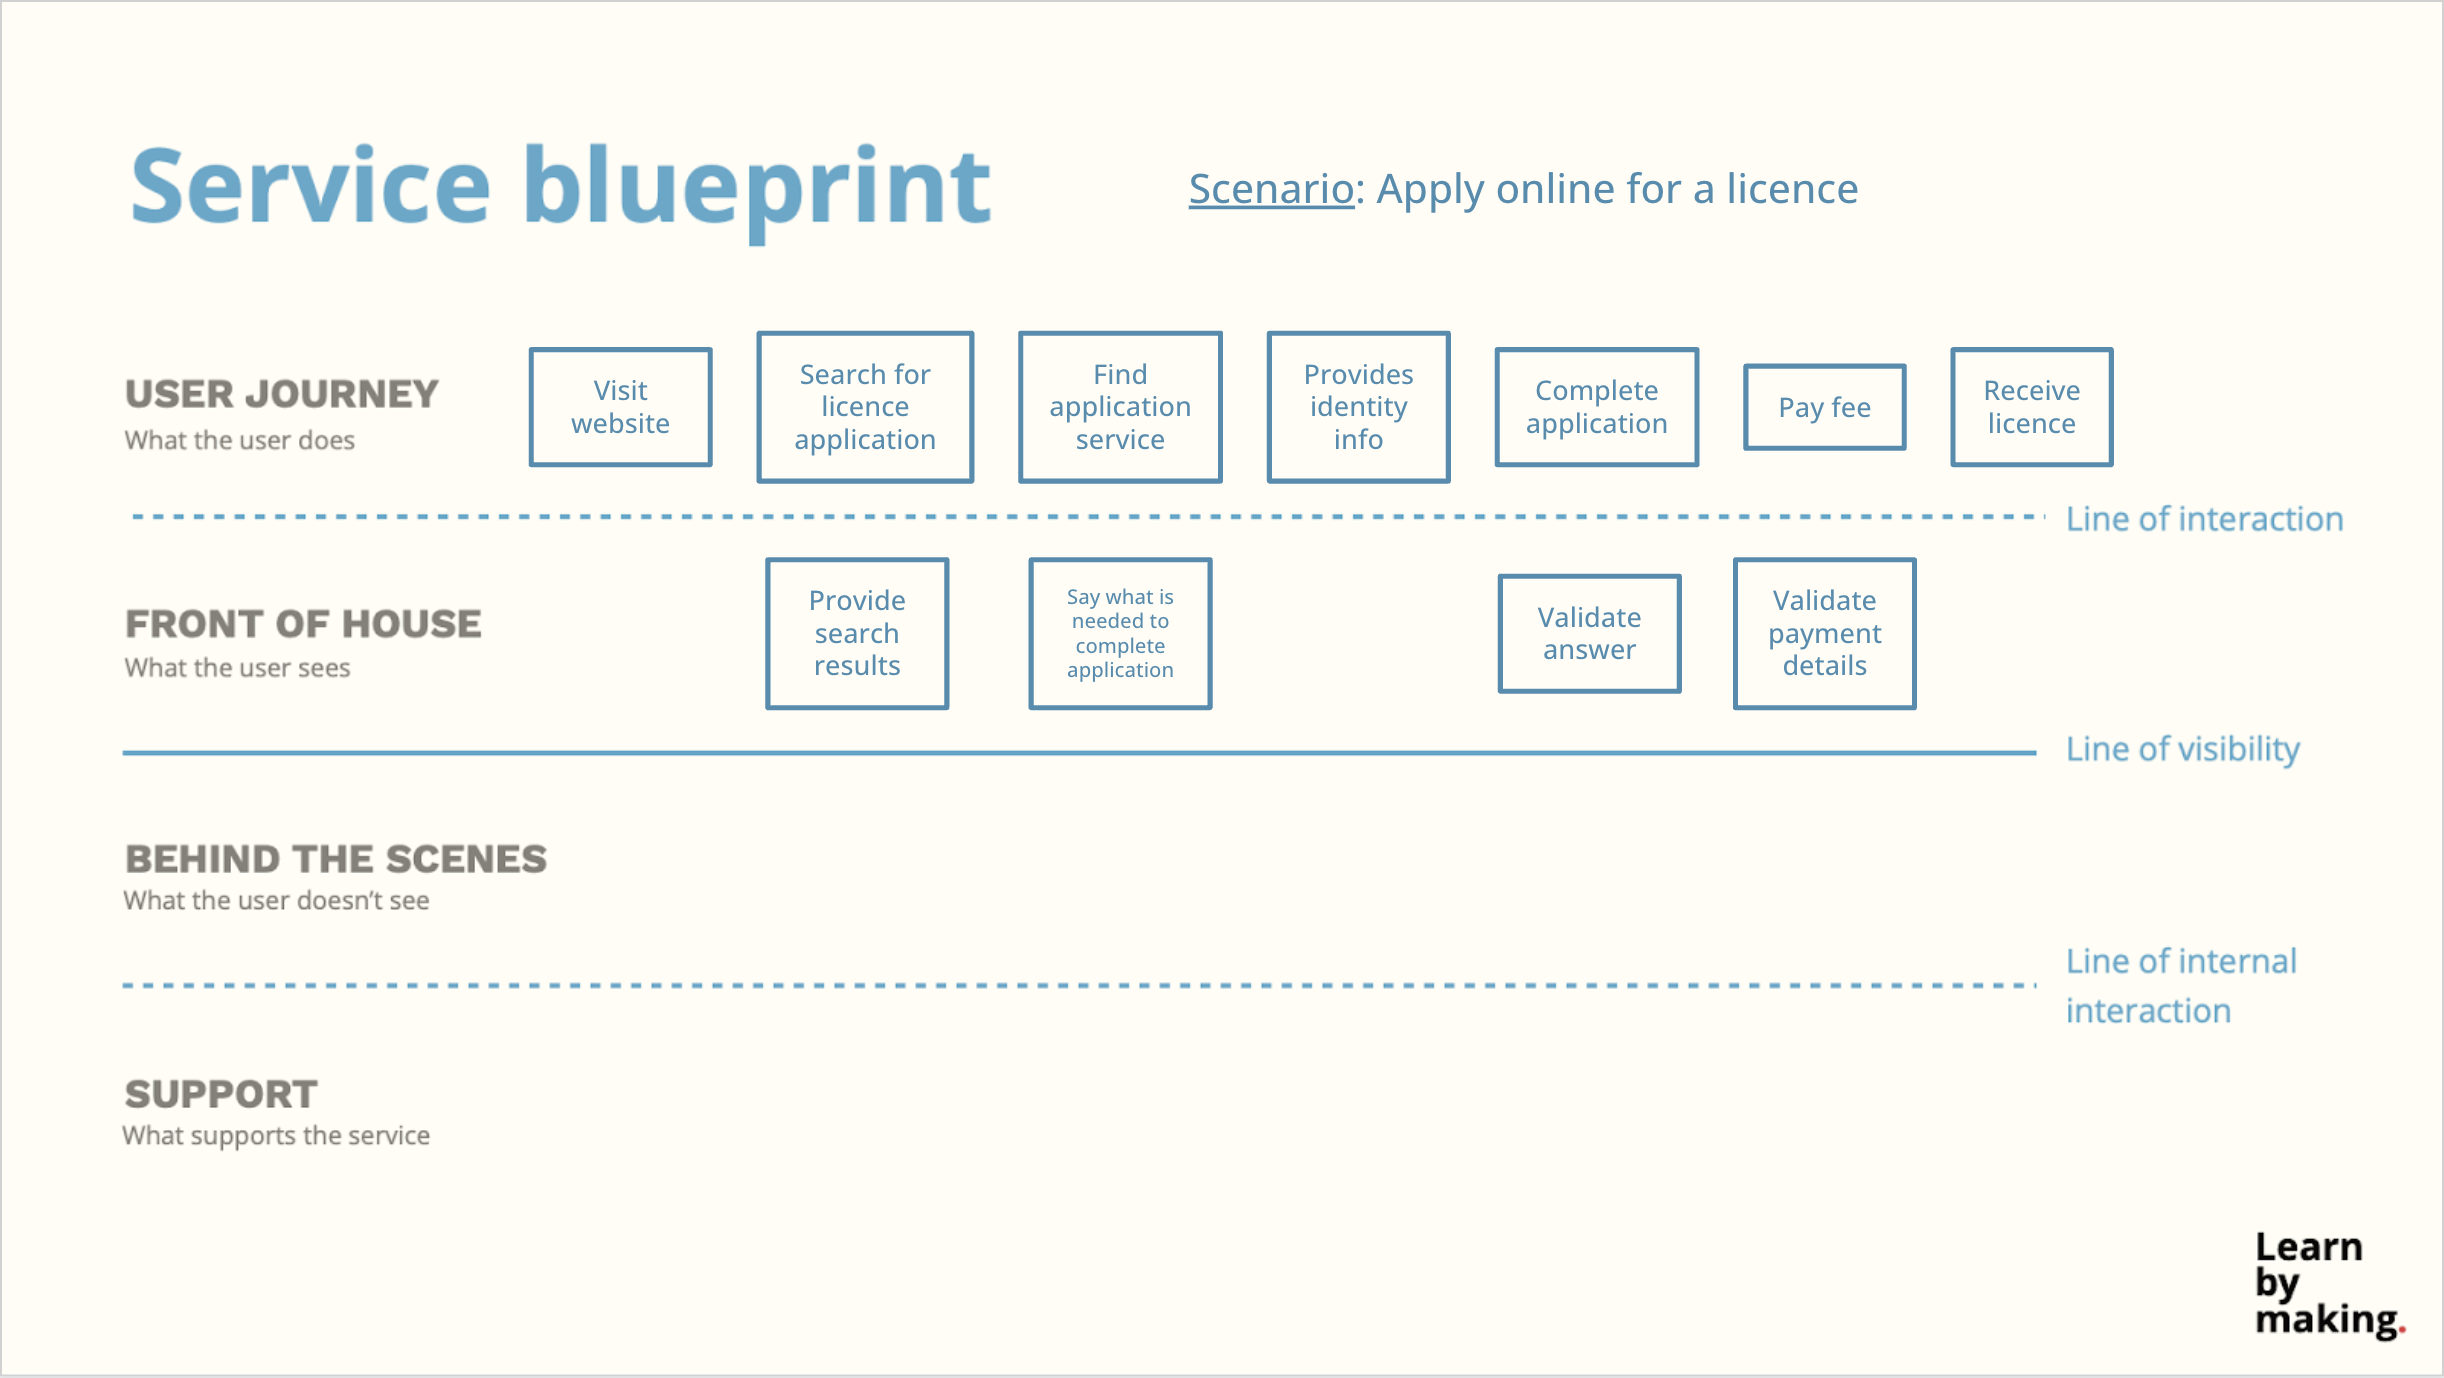 Service blueprint example as previously mentioned, now with the “front of house” section completed. Below “search for licence application” box is “provide search results”. Below “find application service” is a bow with “say what is needed to complete the application”. Below “complete application” is “validate answers. Below “pay fee” is “validate payment details”